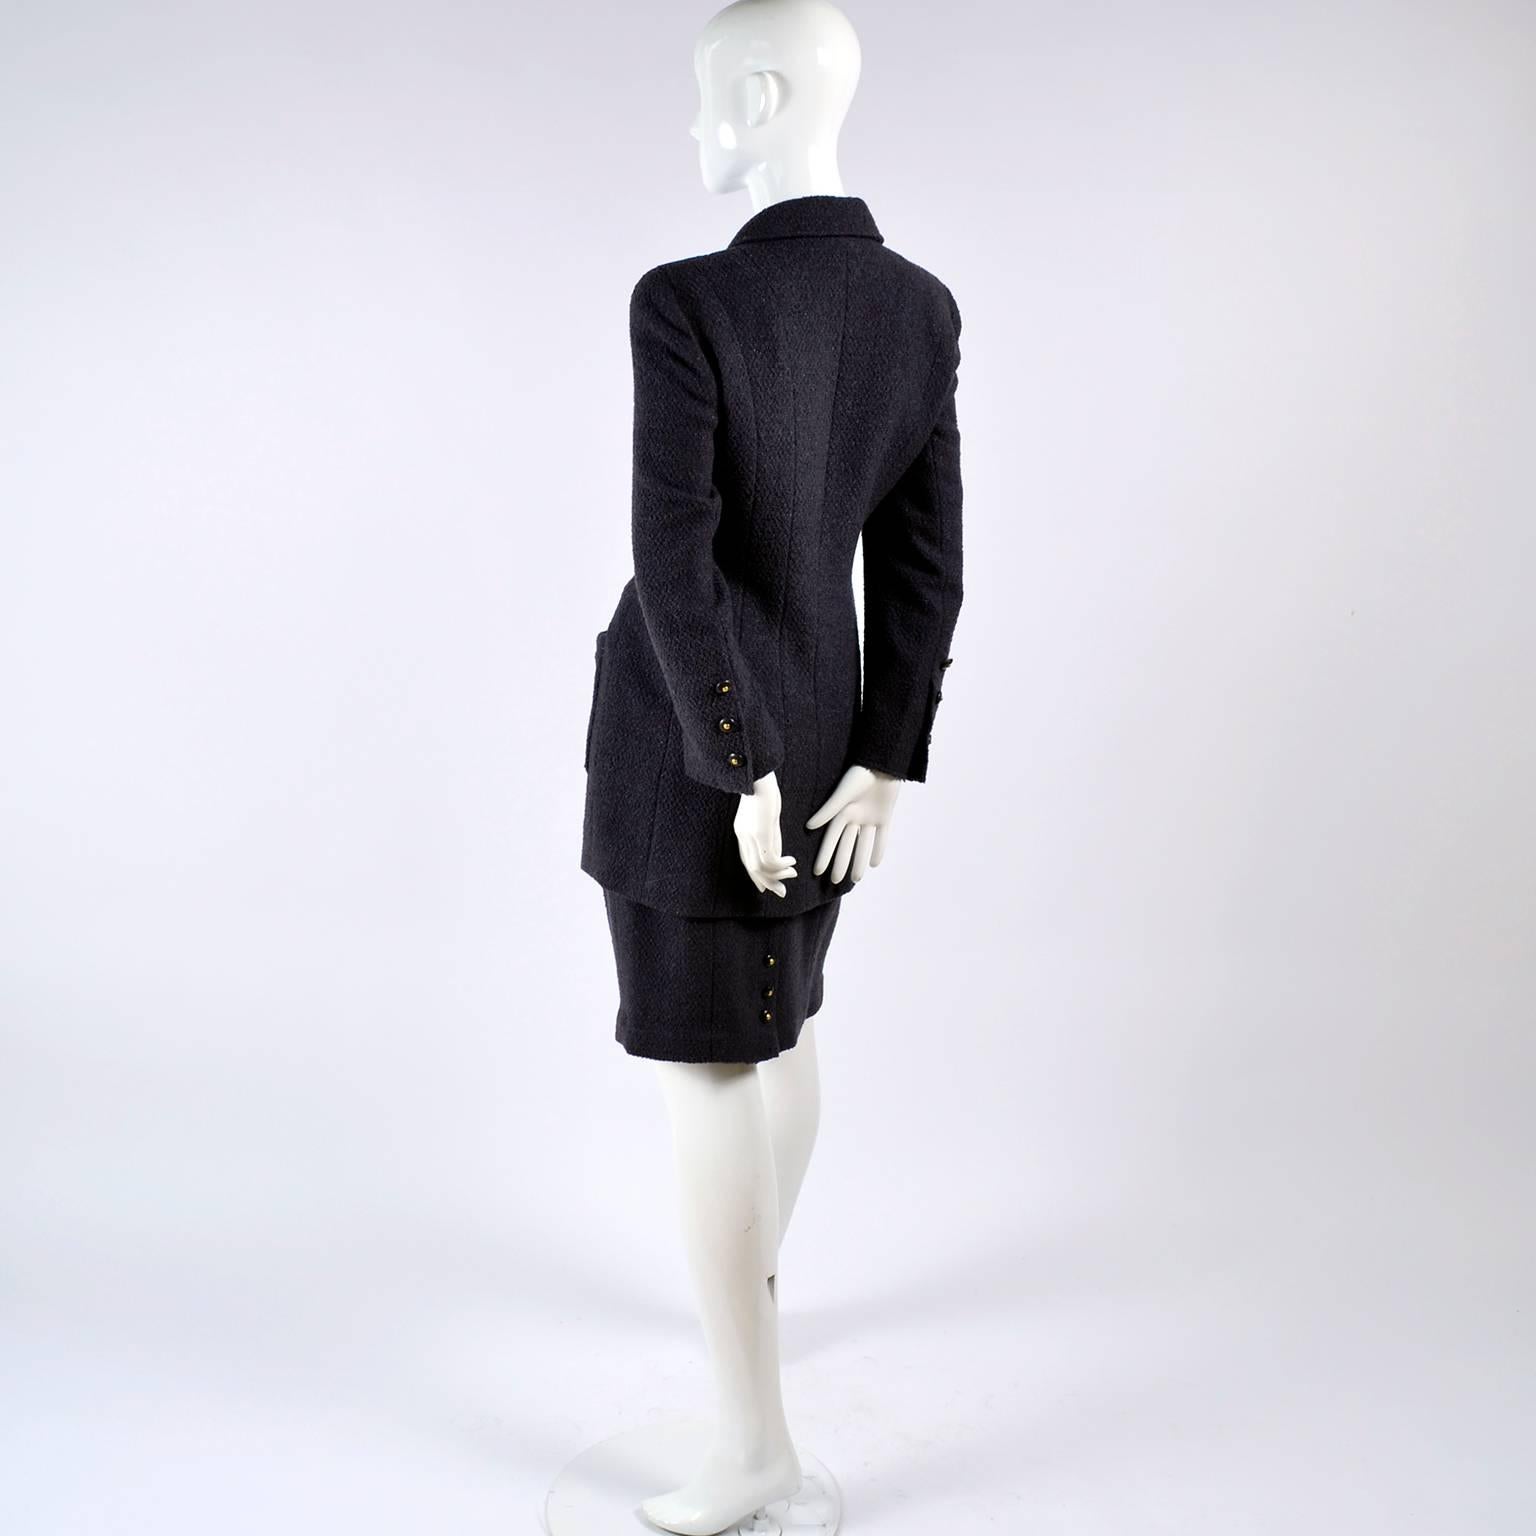 Women's or Men's Chanel Jacket and Skirt Suit in Charcoal Gray Tweed with CC Logo Buttons 